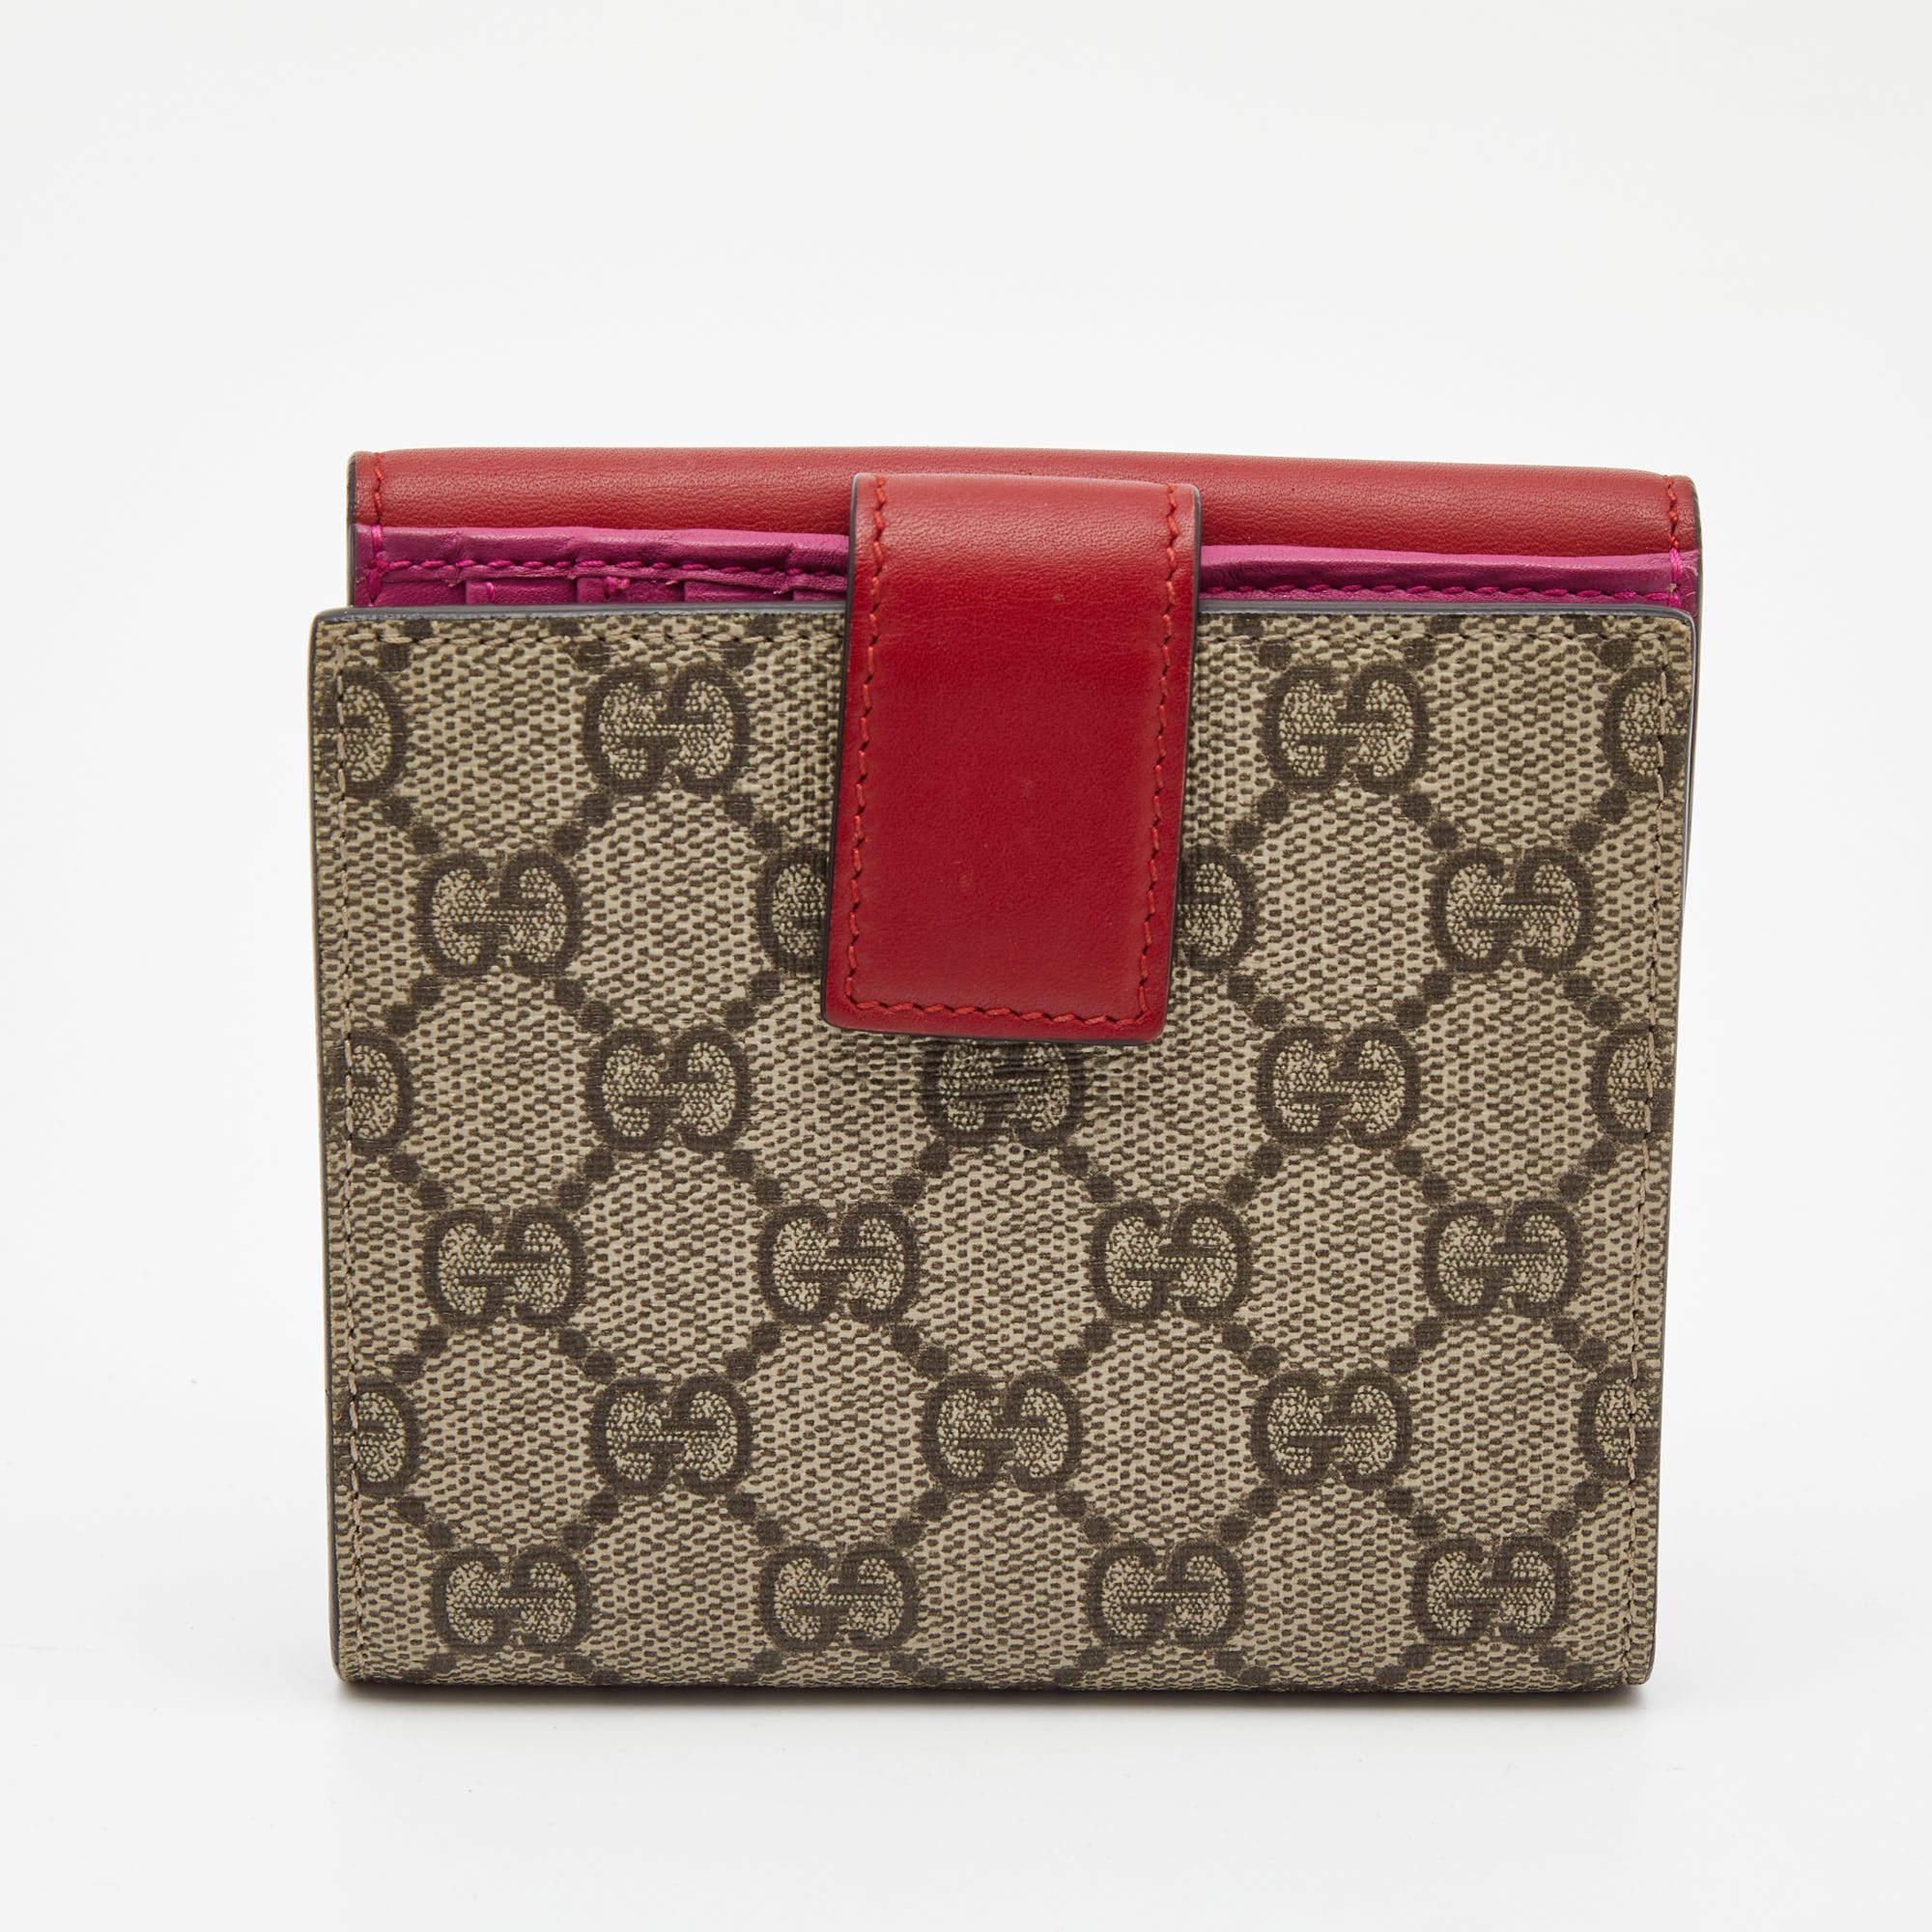 Now here's a wallet that is both stylish and functional. This French wallet by Gucci has been crafted from GG Supreme coated canvas and detailed with leather trims. It opens to reveal multiple slots and compartments to neatly arrange your cards and